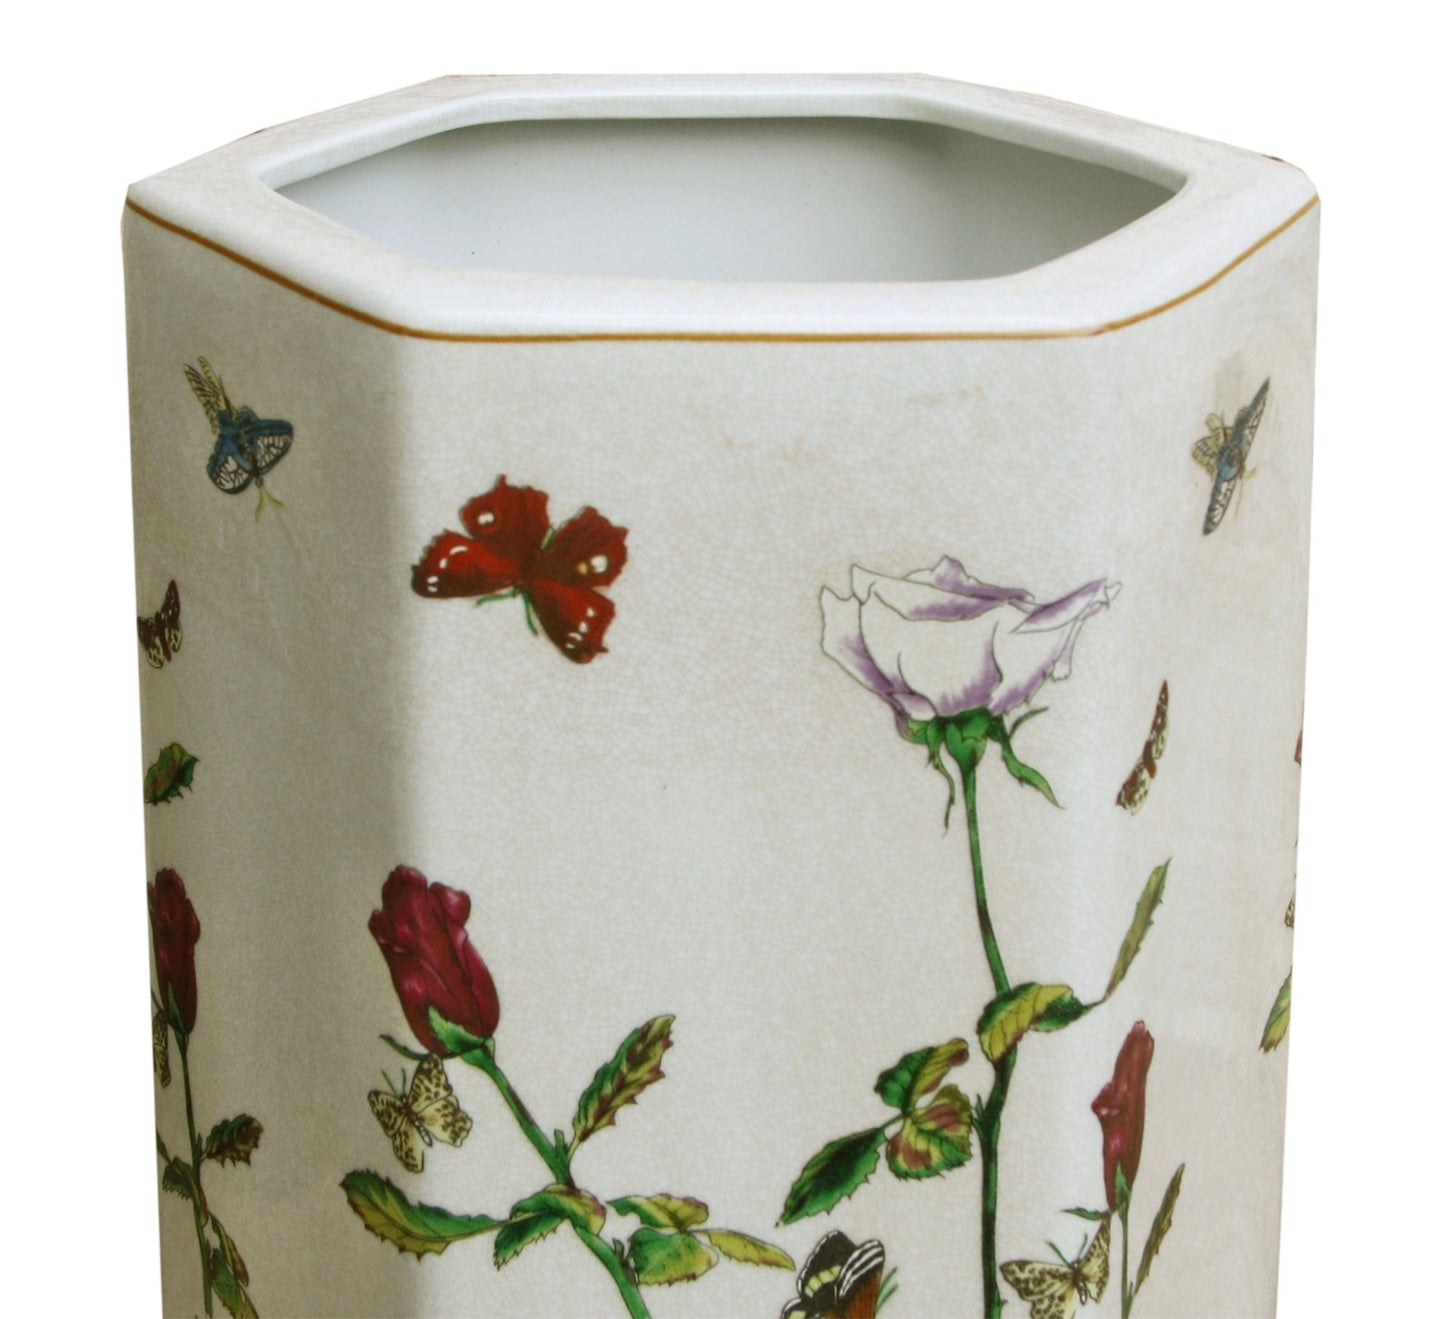 Ceramic Hexagonal Umbrella Stand With Butterfly Design